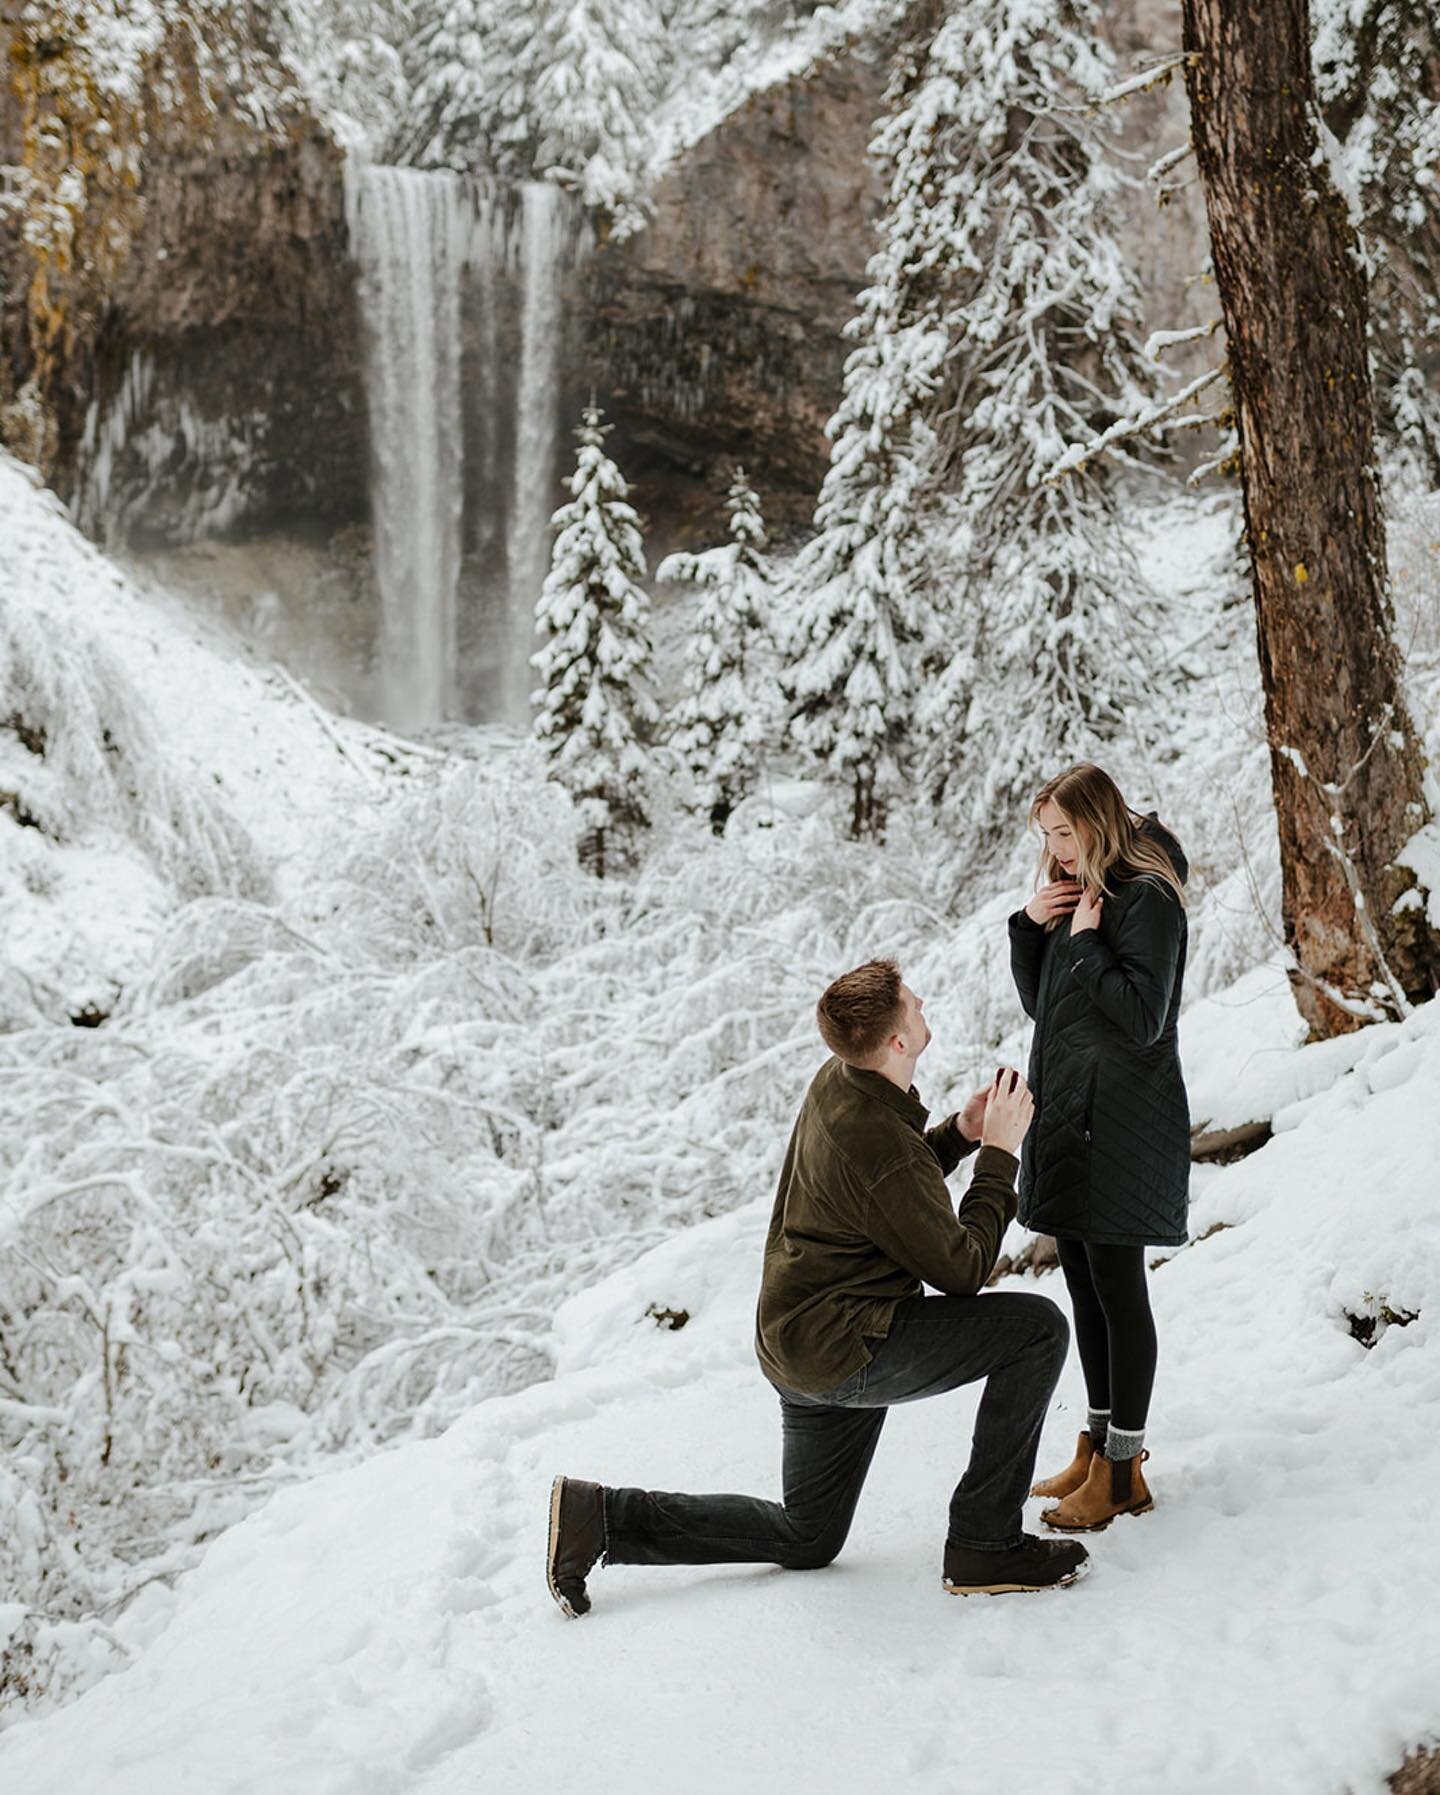 Is it absolutely crucial to have your proposal photographed? No. But is it emotional to look back at the moment and have photos to relive it? Yes 🥹

#waterfallproposal #winterproposal #oregonproposal #proposalphotographer